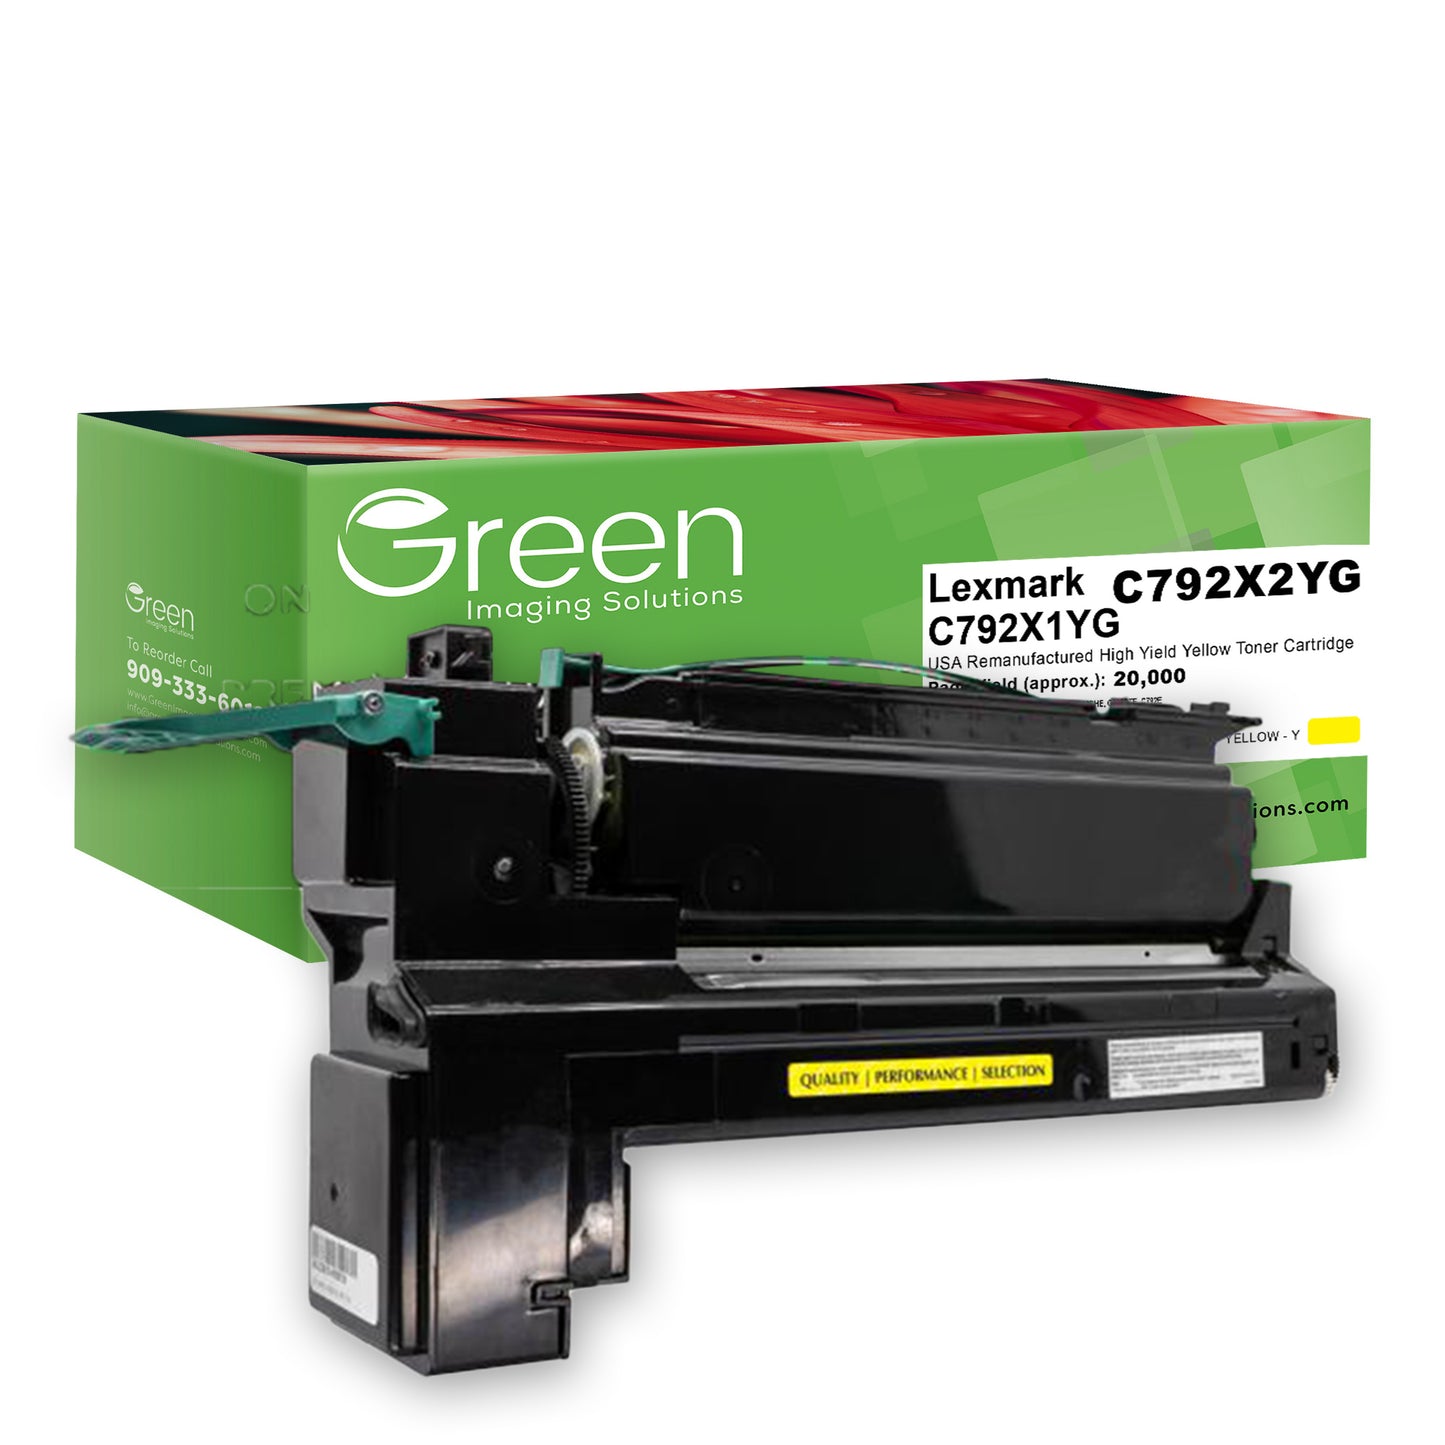 Green Imaging Solutions USA Remanufactured High Yield Yellow Toner Cartridge for Lexmark C792